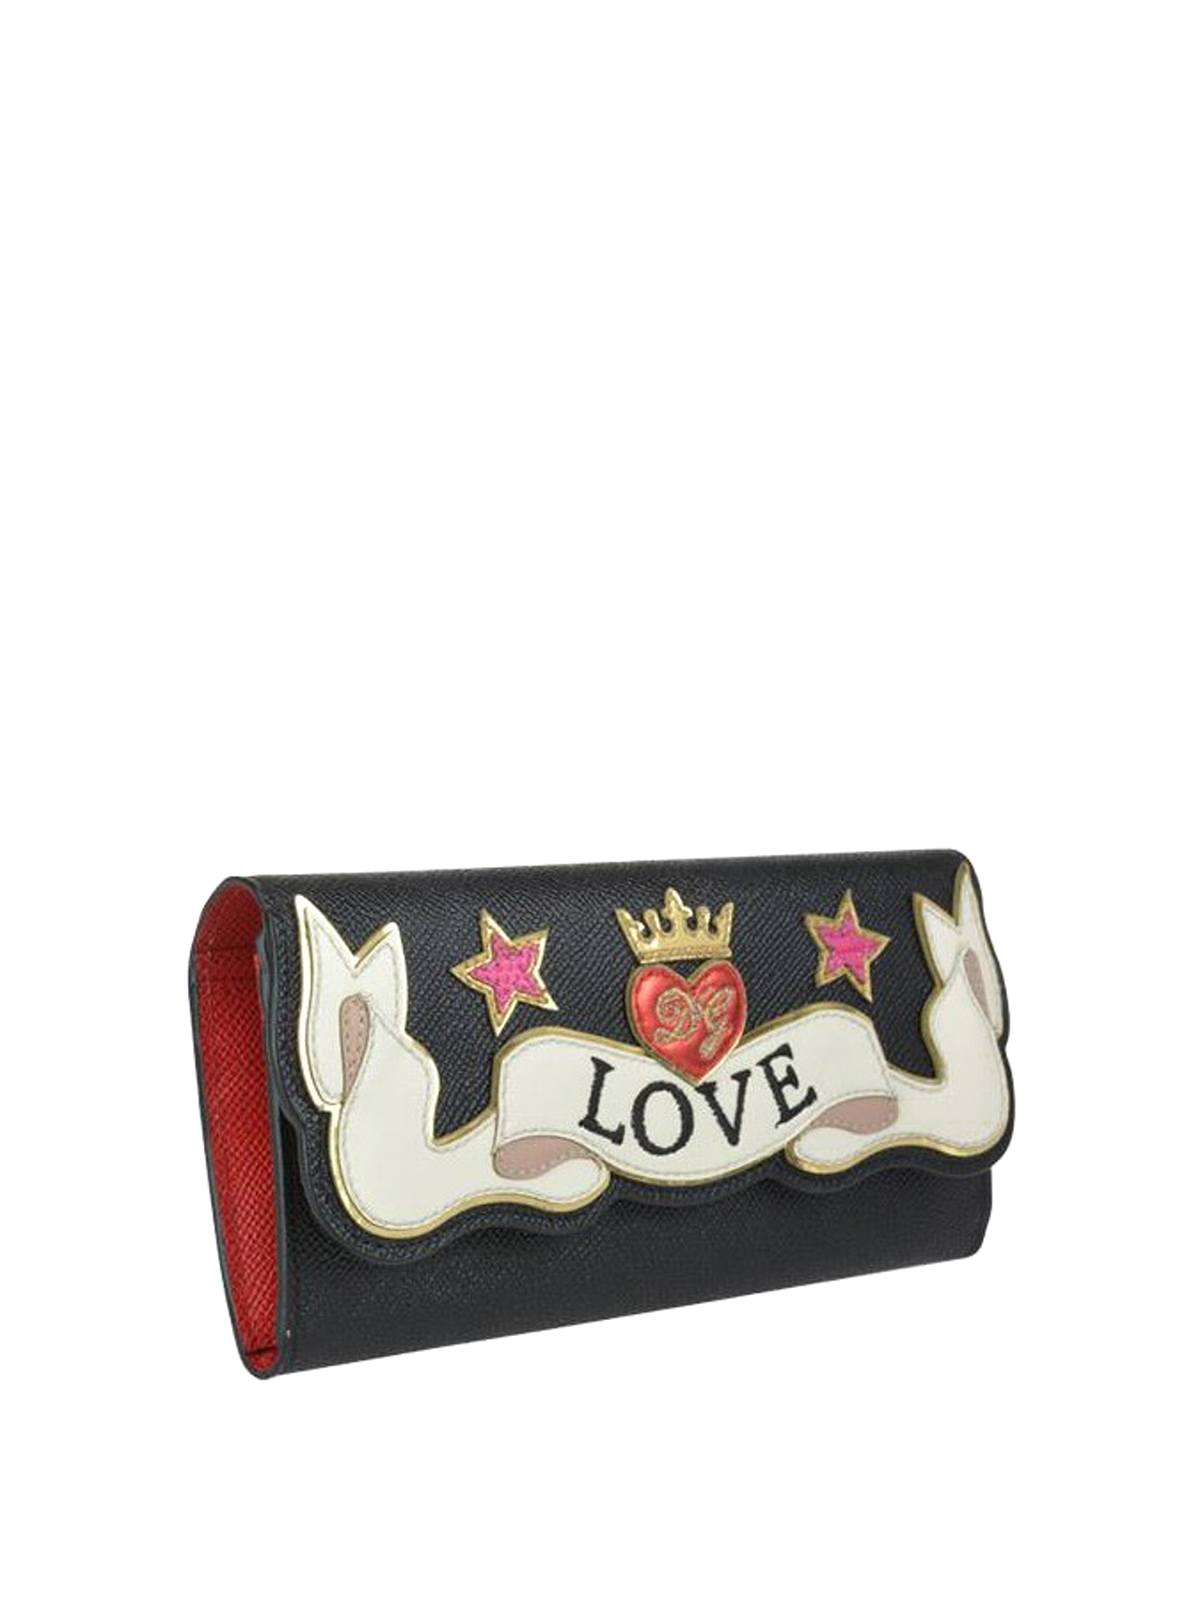 dolce and gabbana continental wallet